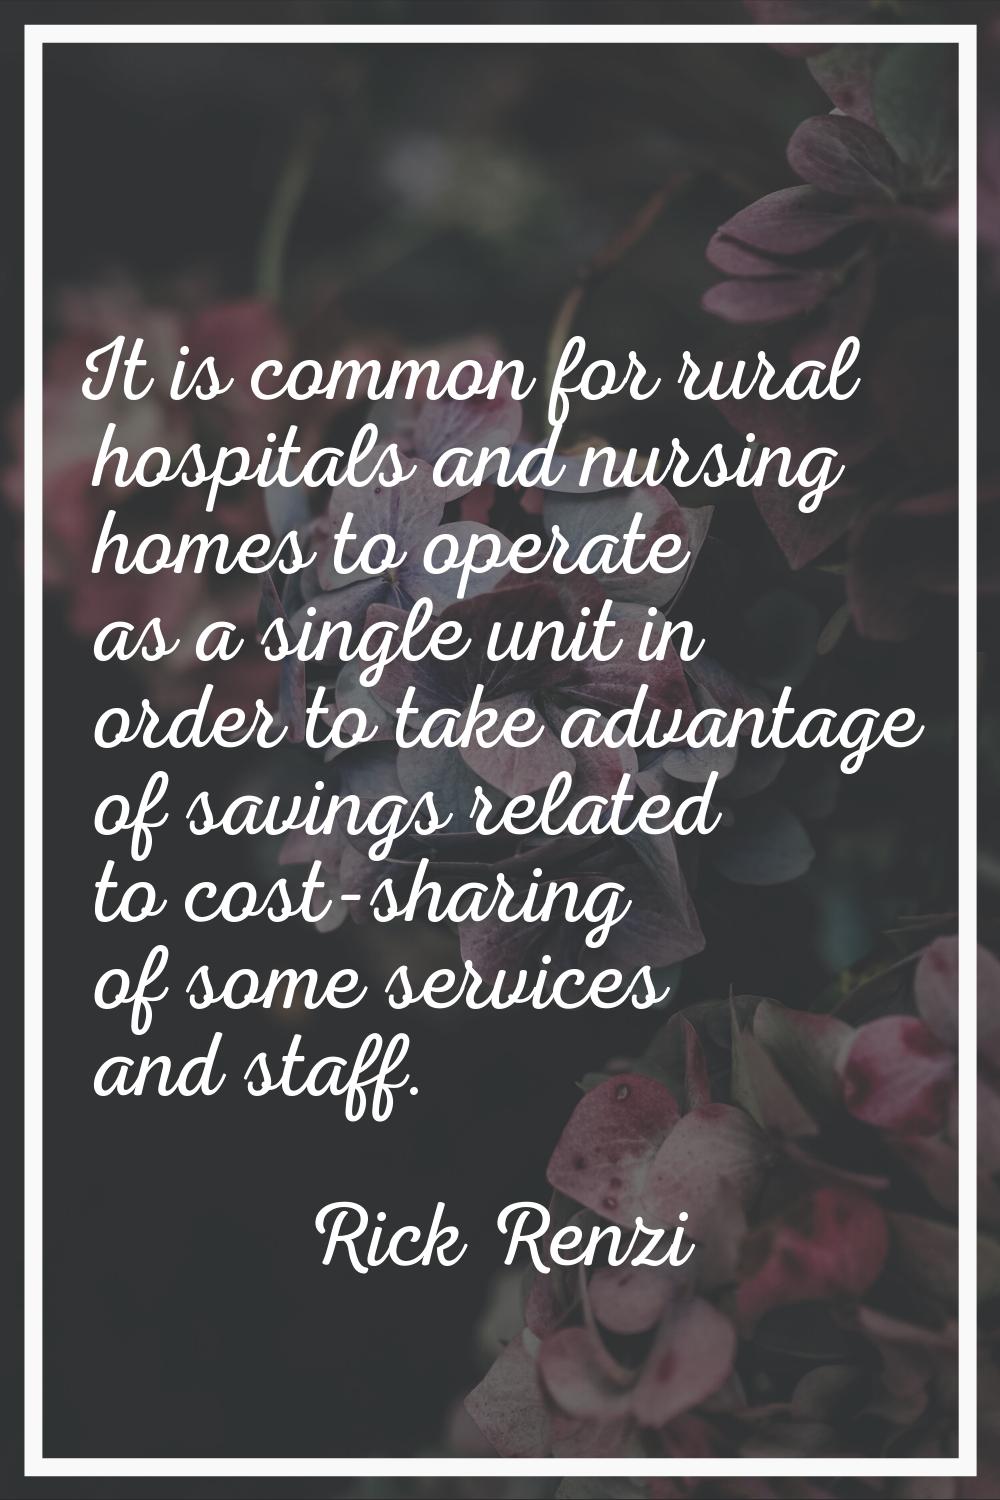 It is common for rural hospitals and nursing homes to operate as a single unit in order to take adv